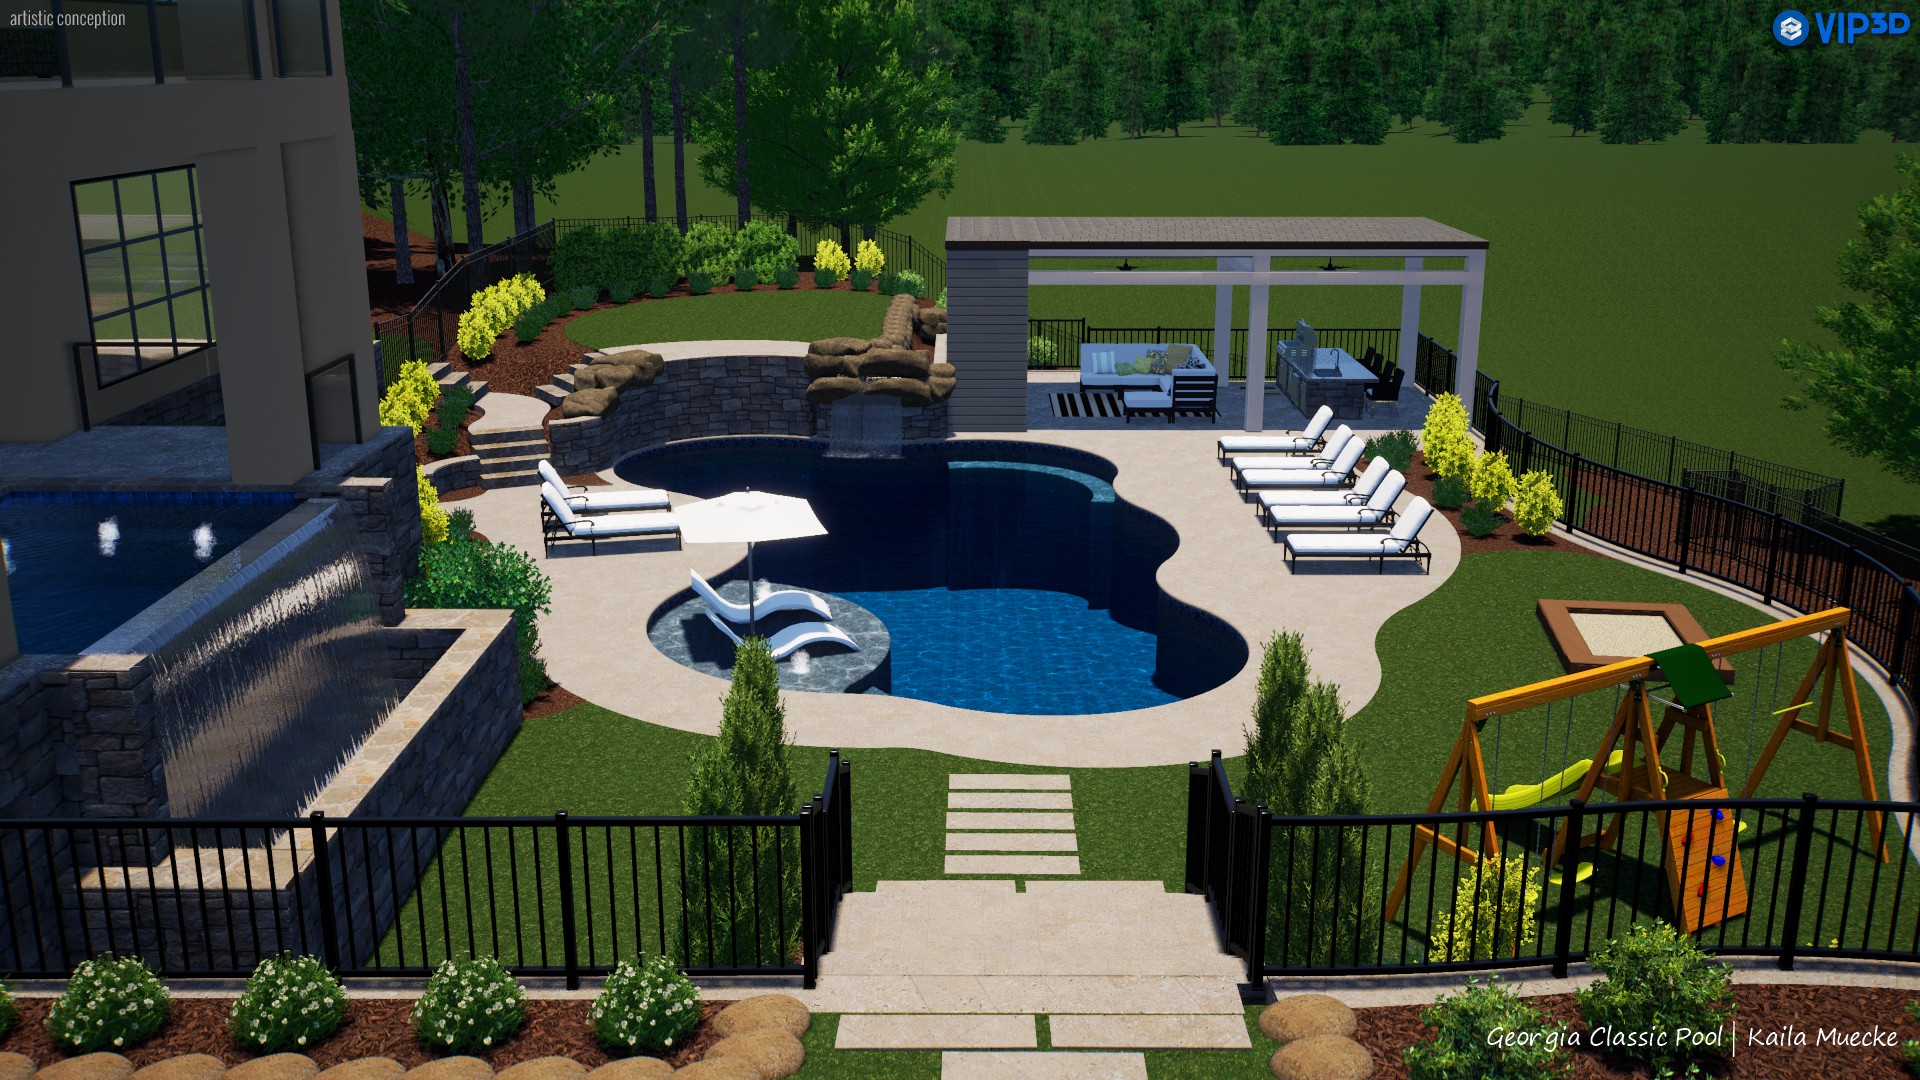 A 3D rendering of a modern pool with a boulder waterfall cascading into the pool.